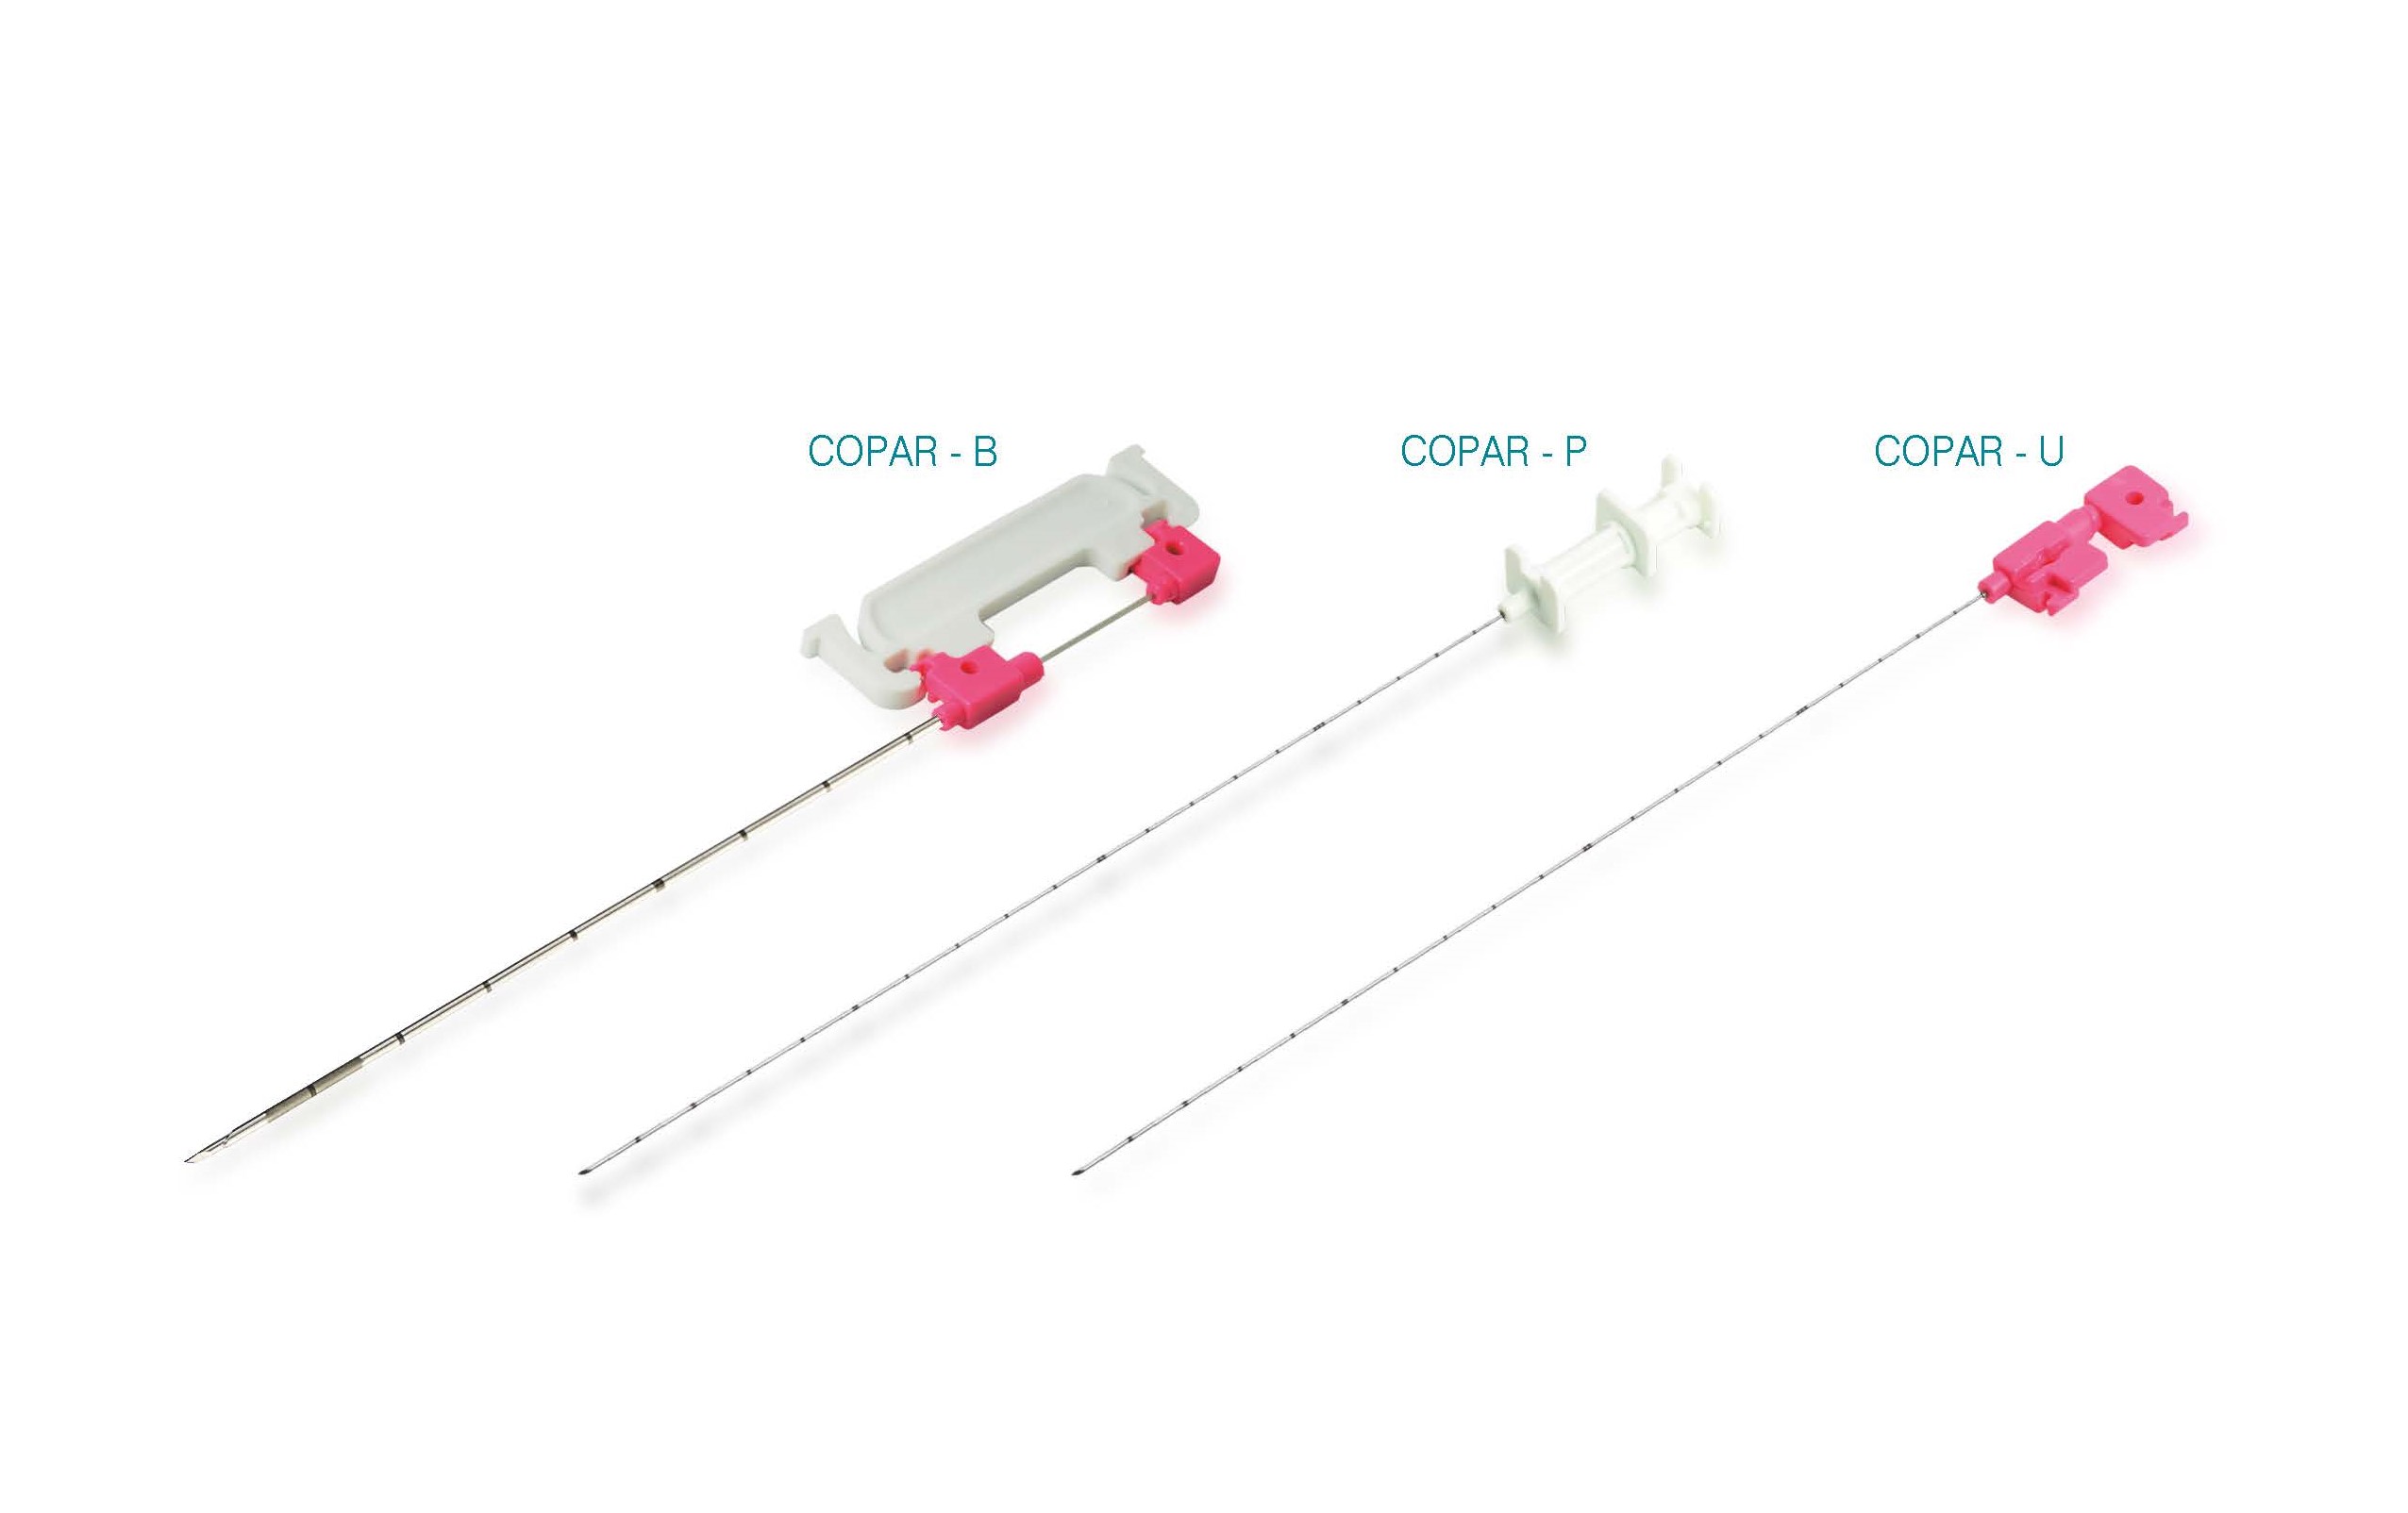 COPAR Biopsy Needles Compatible With Fully Automatic Gun